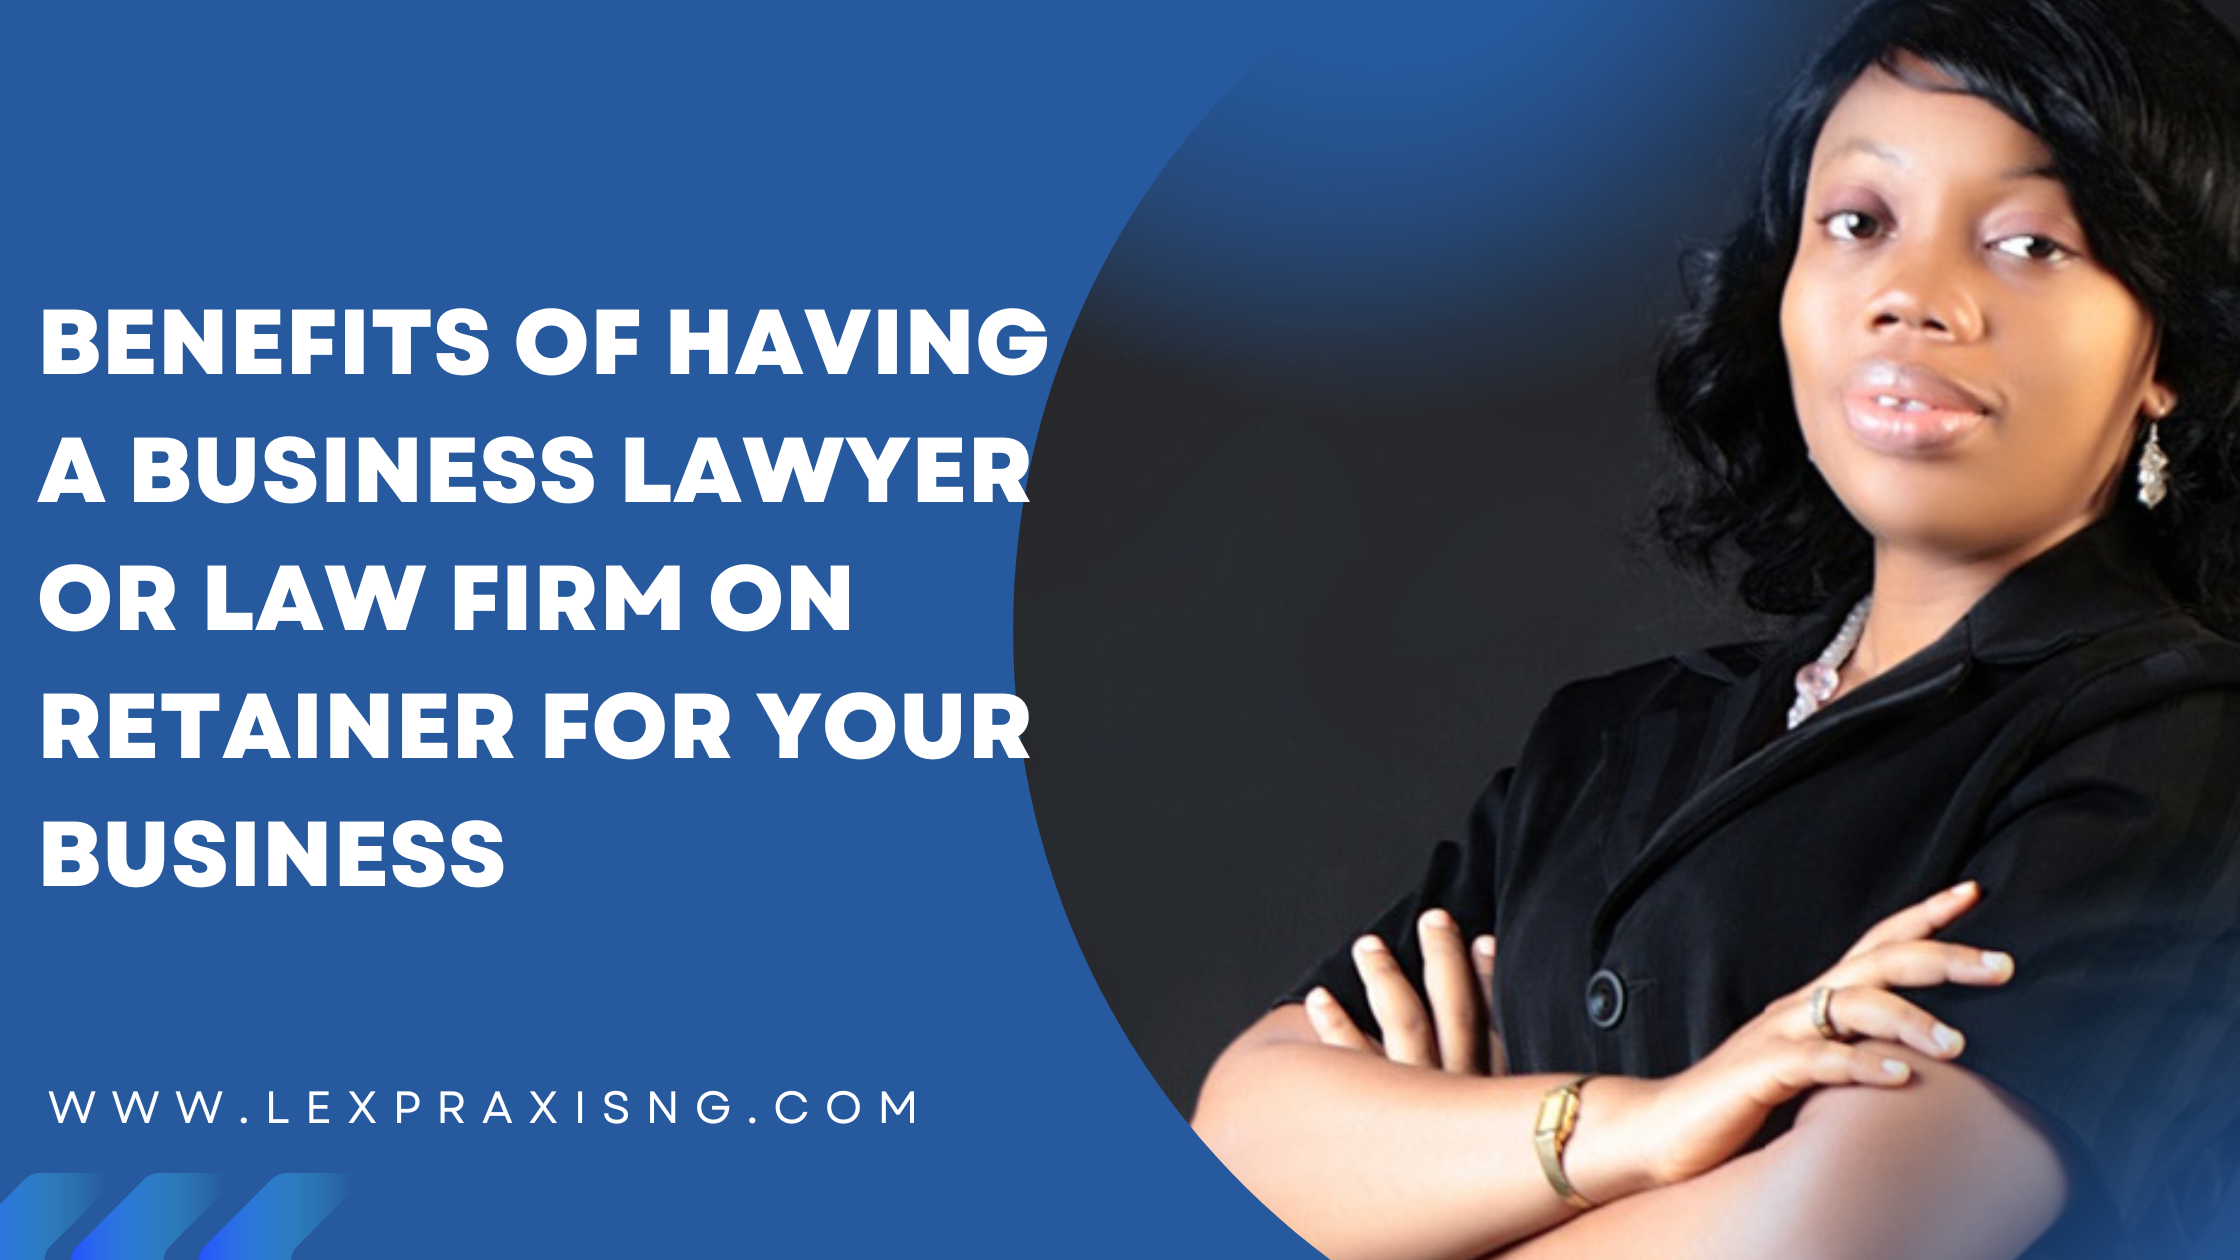 BENEFITS OF HAVING A LAW FIRM ON RETAINER FOR YOUR BUSINESS –  